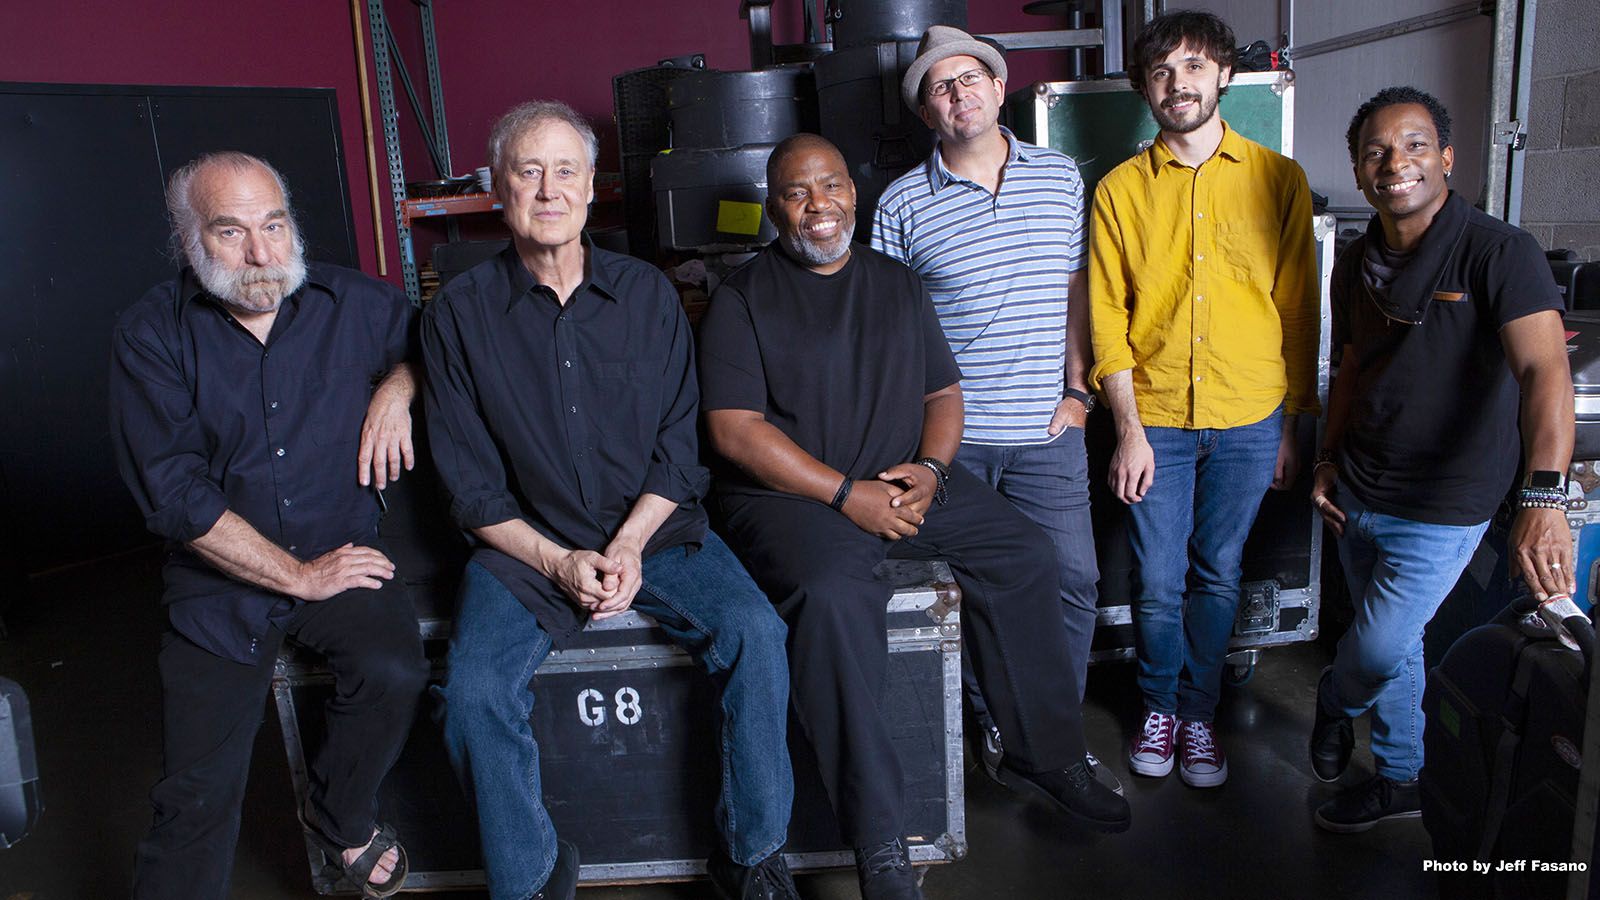 Bruce Hornsby & The Noisemakers will be at The Clyde Theatre on Sunday, Sept. 17. From left are J.T. Thomas, Bruce Hornsby, J.V. Collier, Gibb Droll, John Mailander, and Chad Wright.